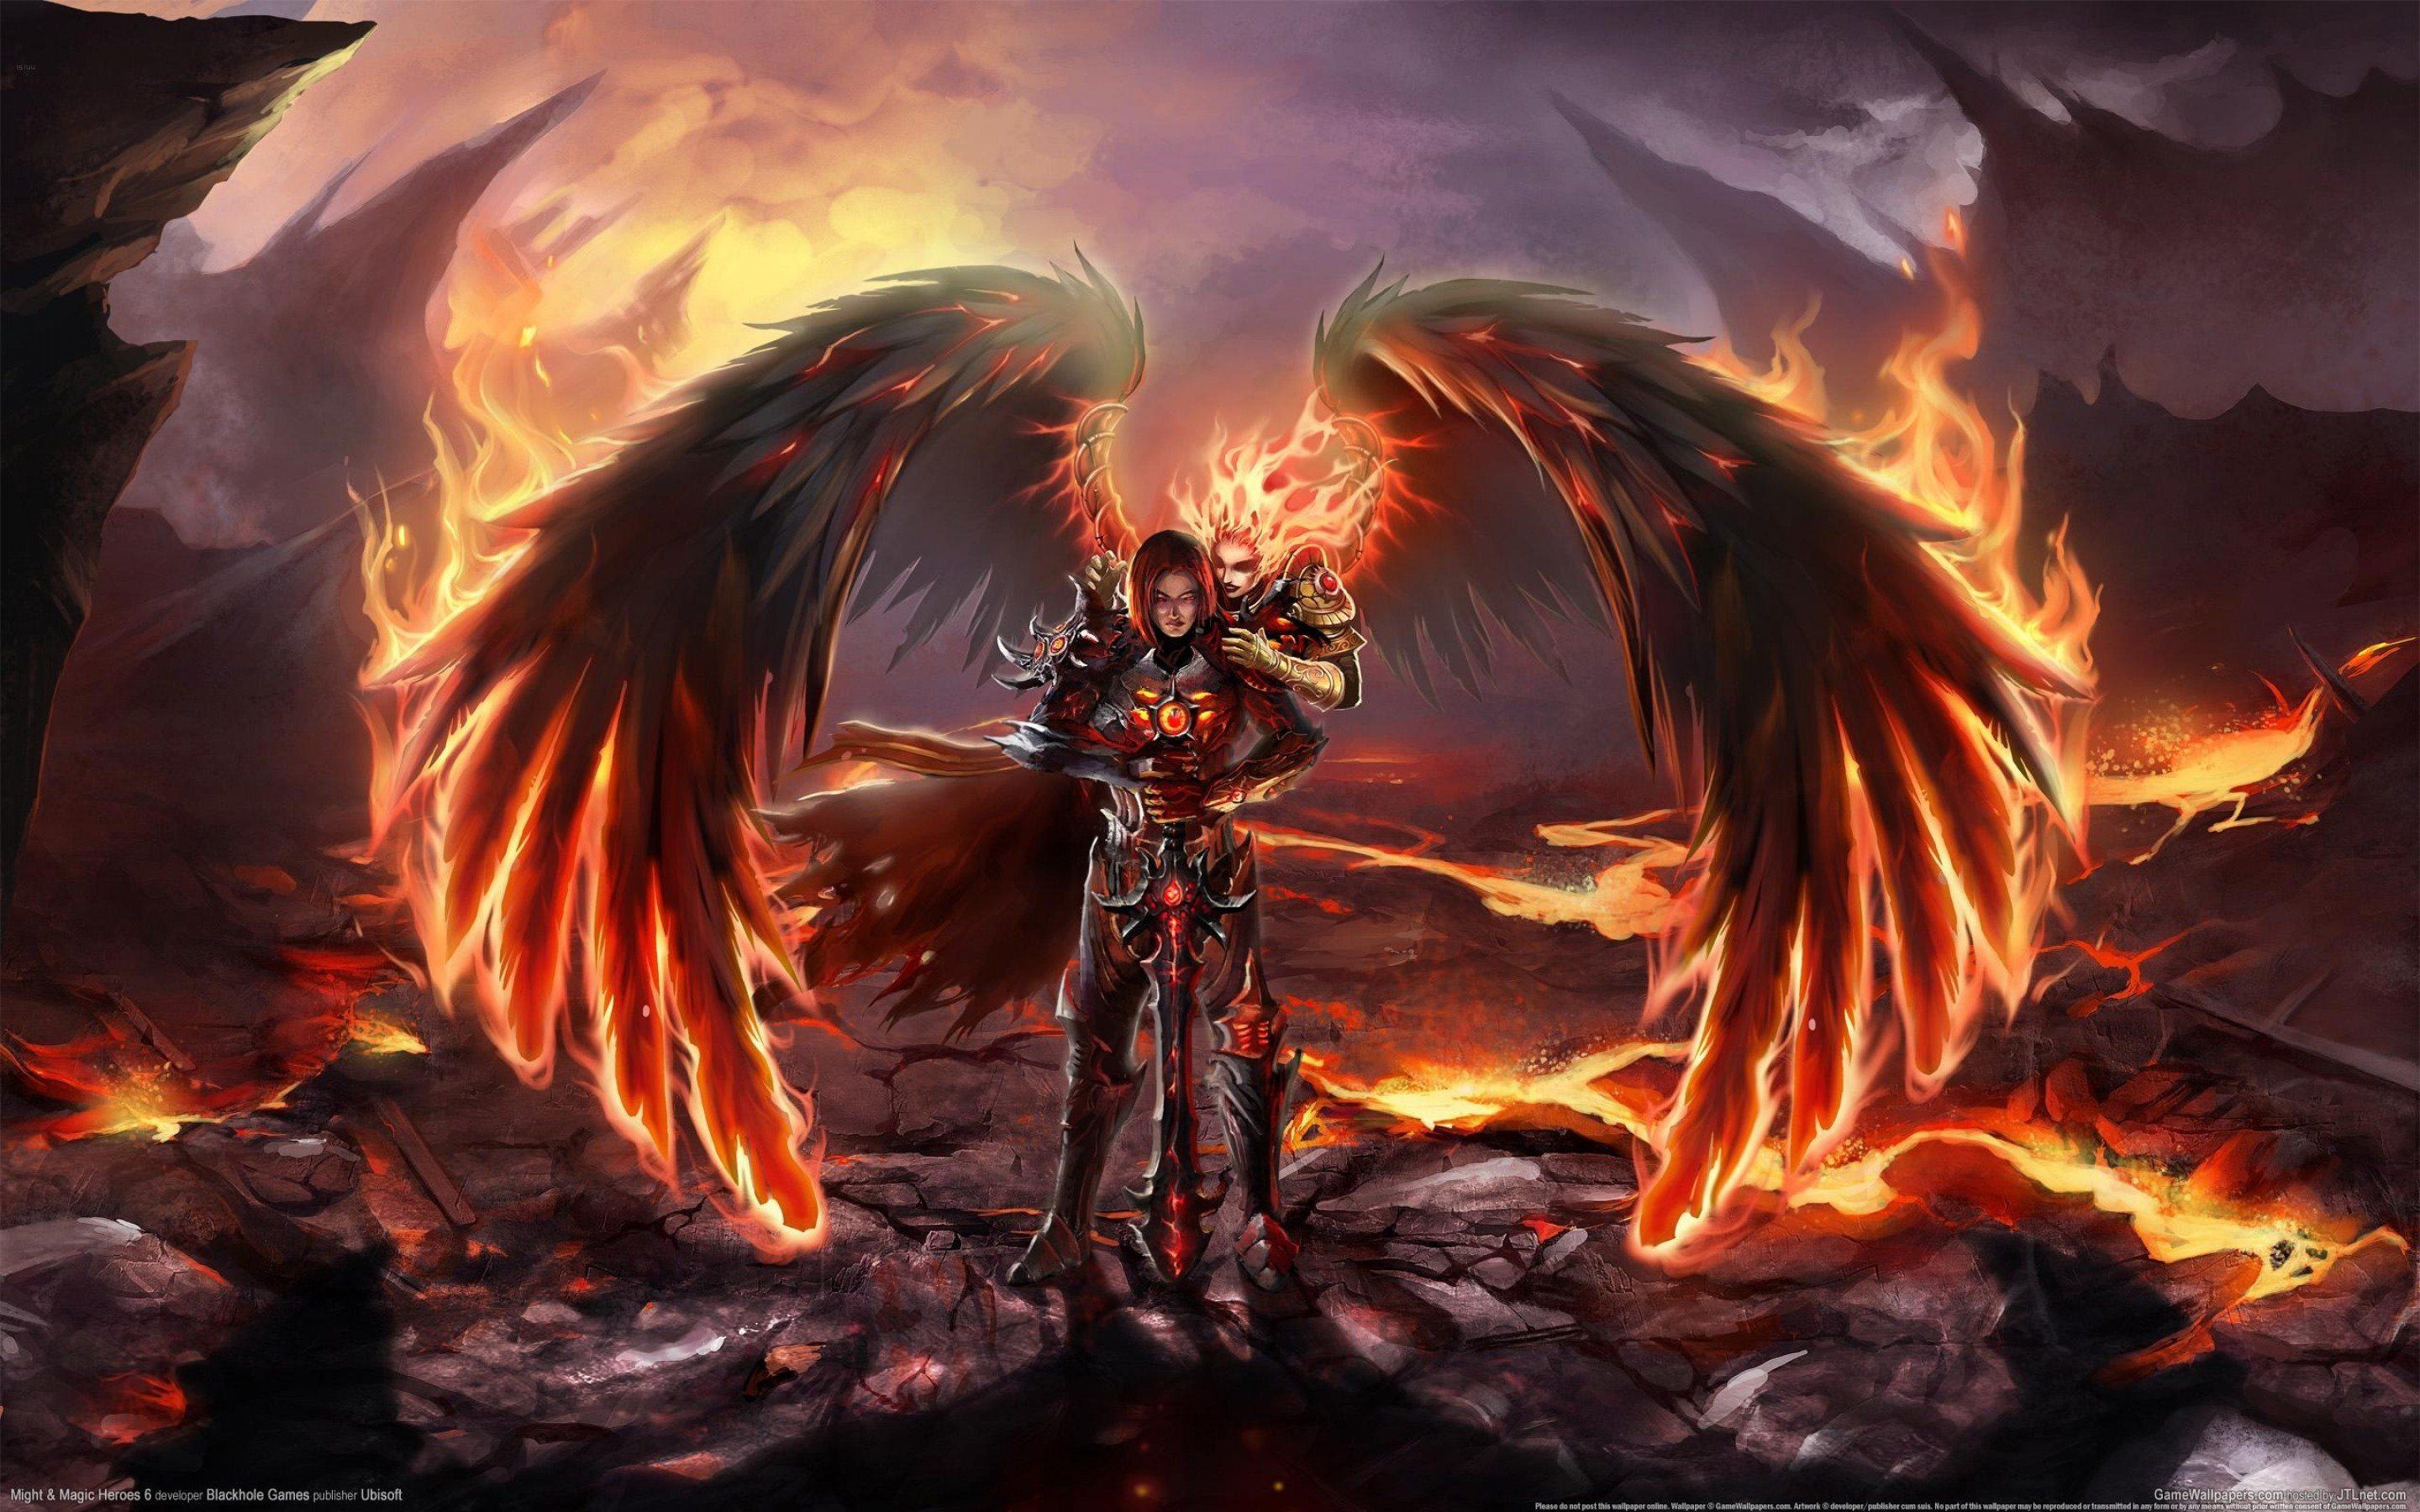 heroes, Might, Magic, Strategy, Fantasy, Fighting, Adventure, Action, Online, 1hmm, Warrior, Fire, Demon, Angel Wallpaper HD / Desktop and Mobile Background